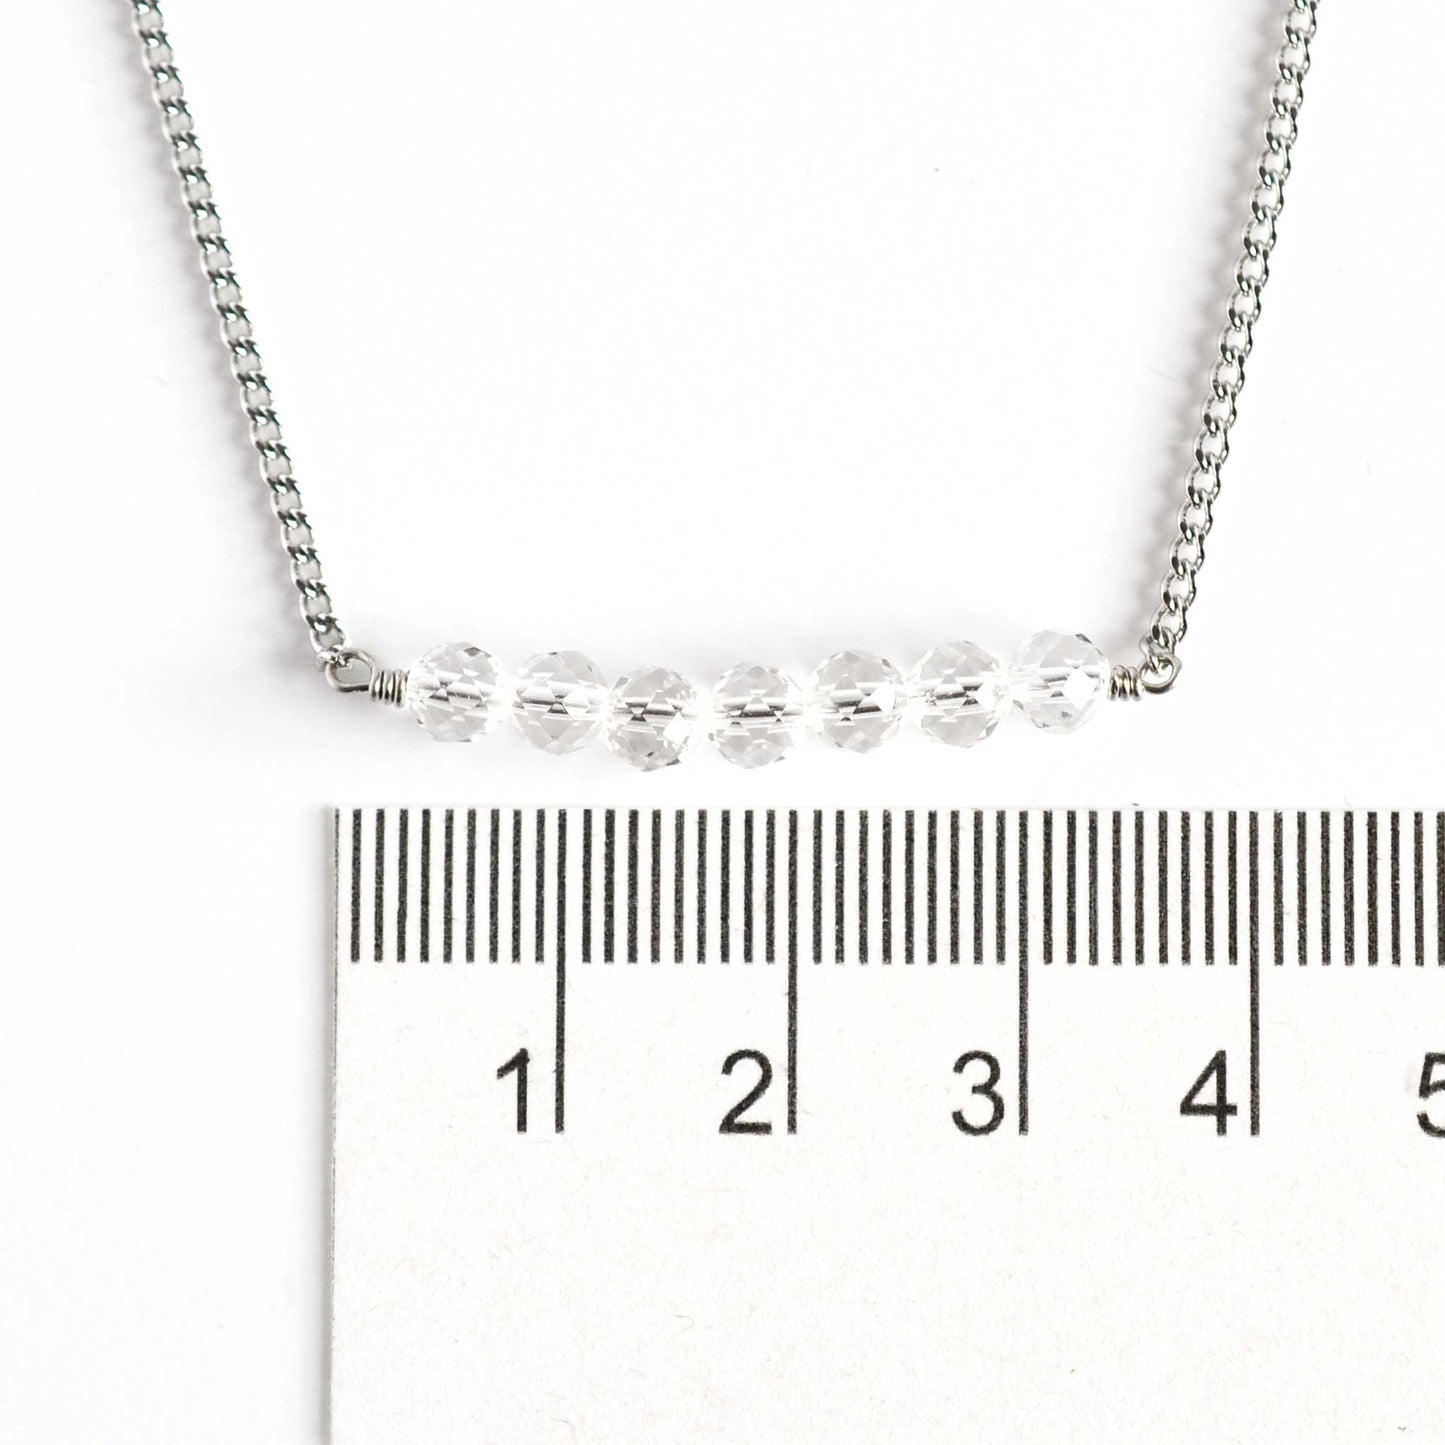 Dainty Rock Crystal necklace with 4mm gemstone beads next to ruler